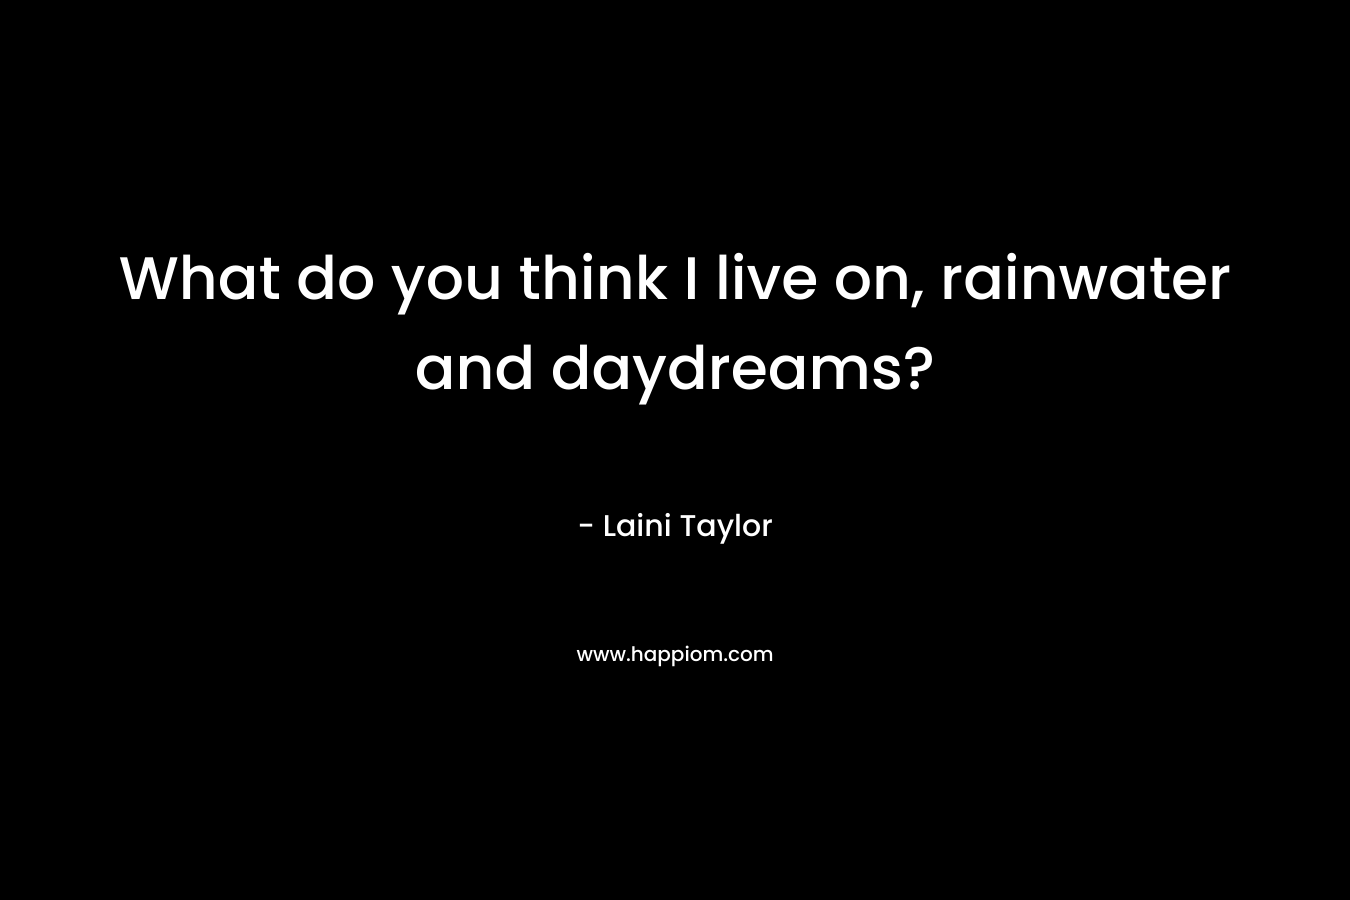 What do you think I live on, rainwater and daydreams? – Laini Taylor